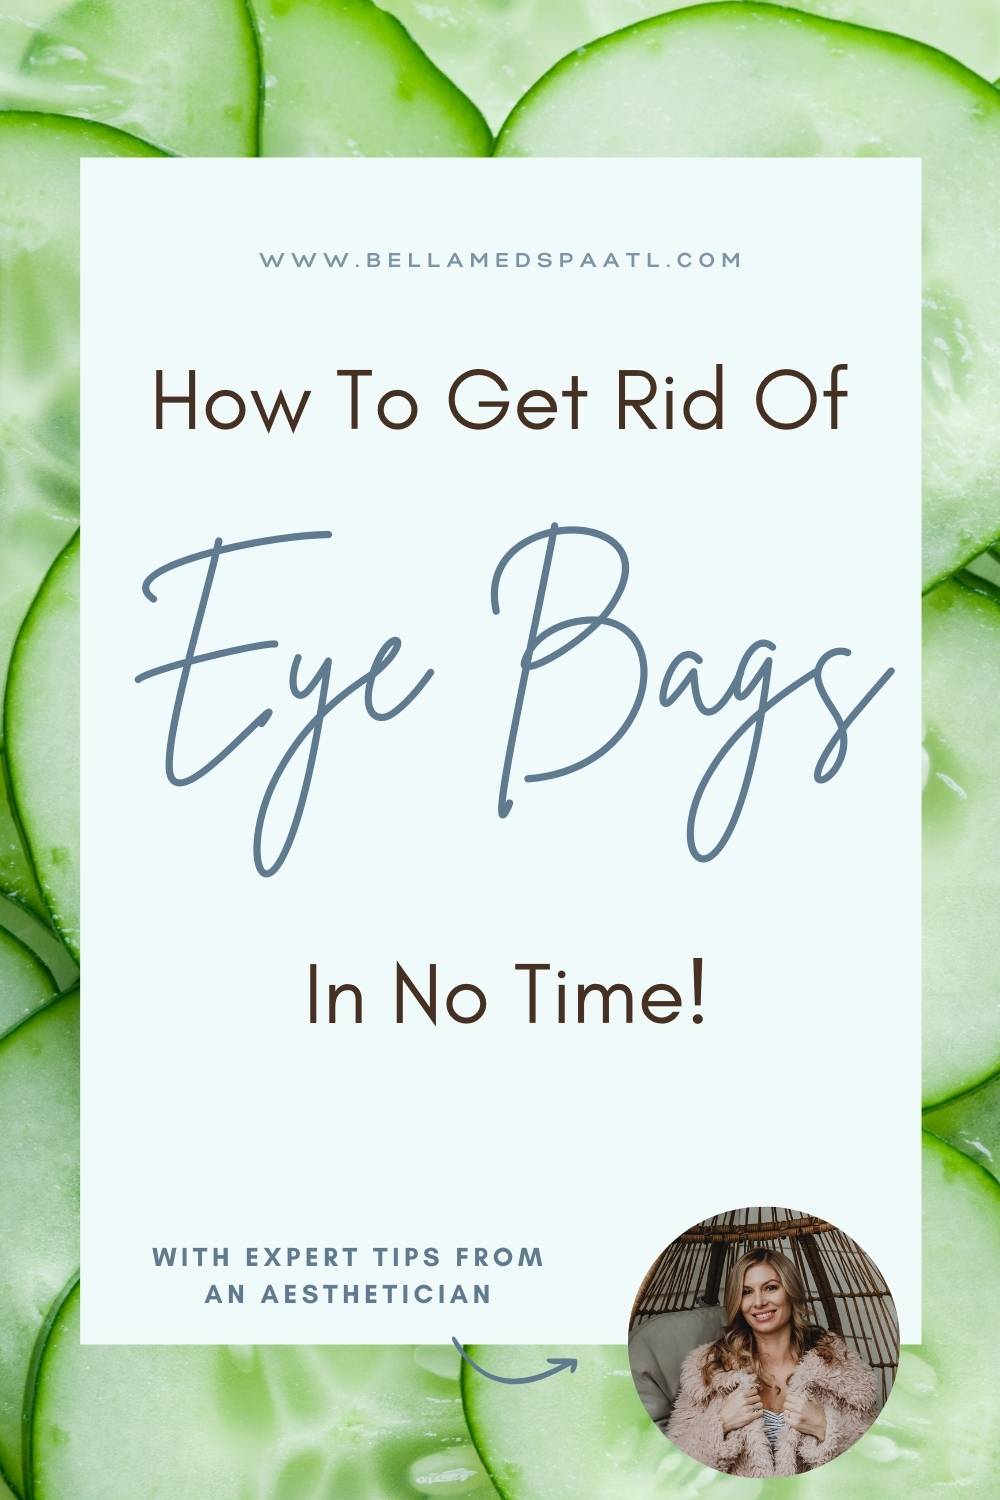 Looking for the best under eye bag remedies? Whether you're looking for natural under eye bag remedies or want a medspa solution, here are my top tips to get rid of eye bags!